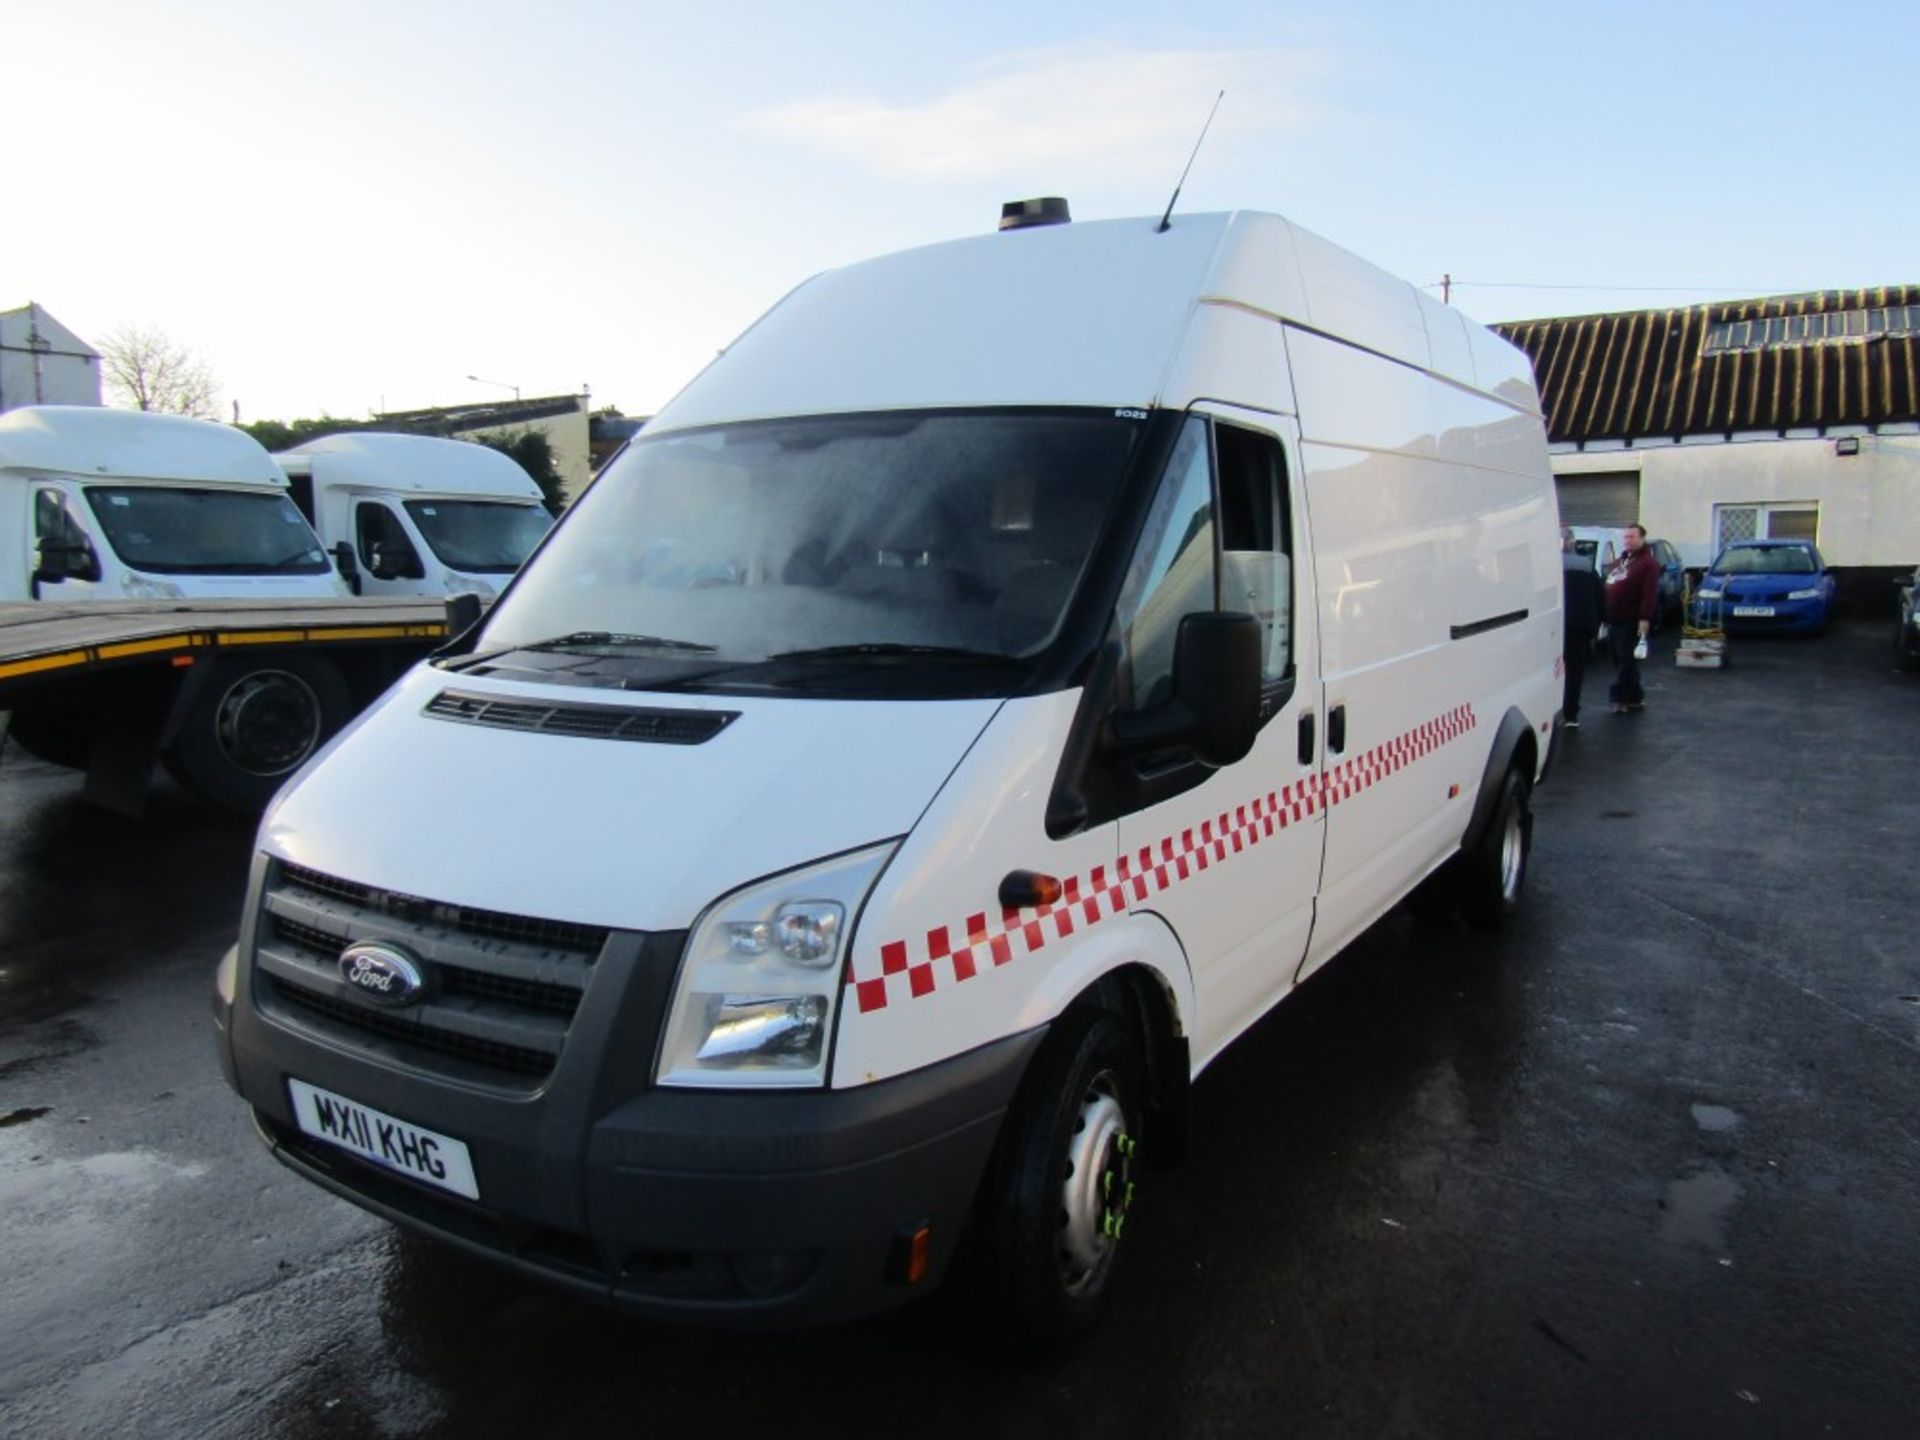 11 reg FORD TRANSIT 115 T460 RWD (DIRECT GTR M/C FIRE) 1ST REG 04/11, 173872M, V5 HERE, 1 OWNER FROM - Image 2 of 7